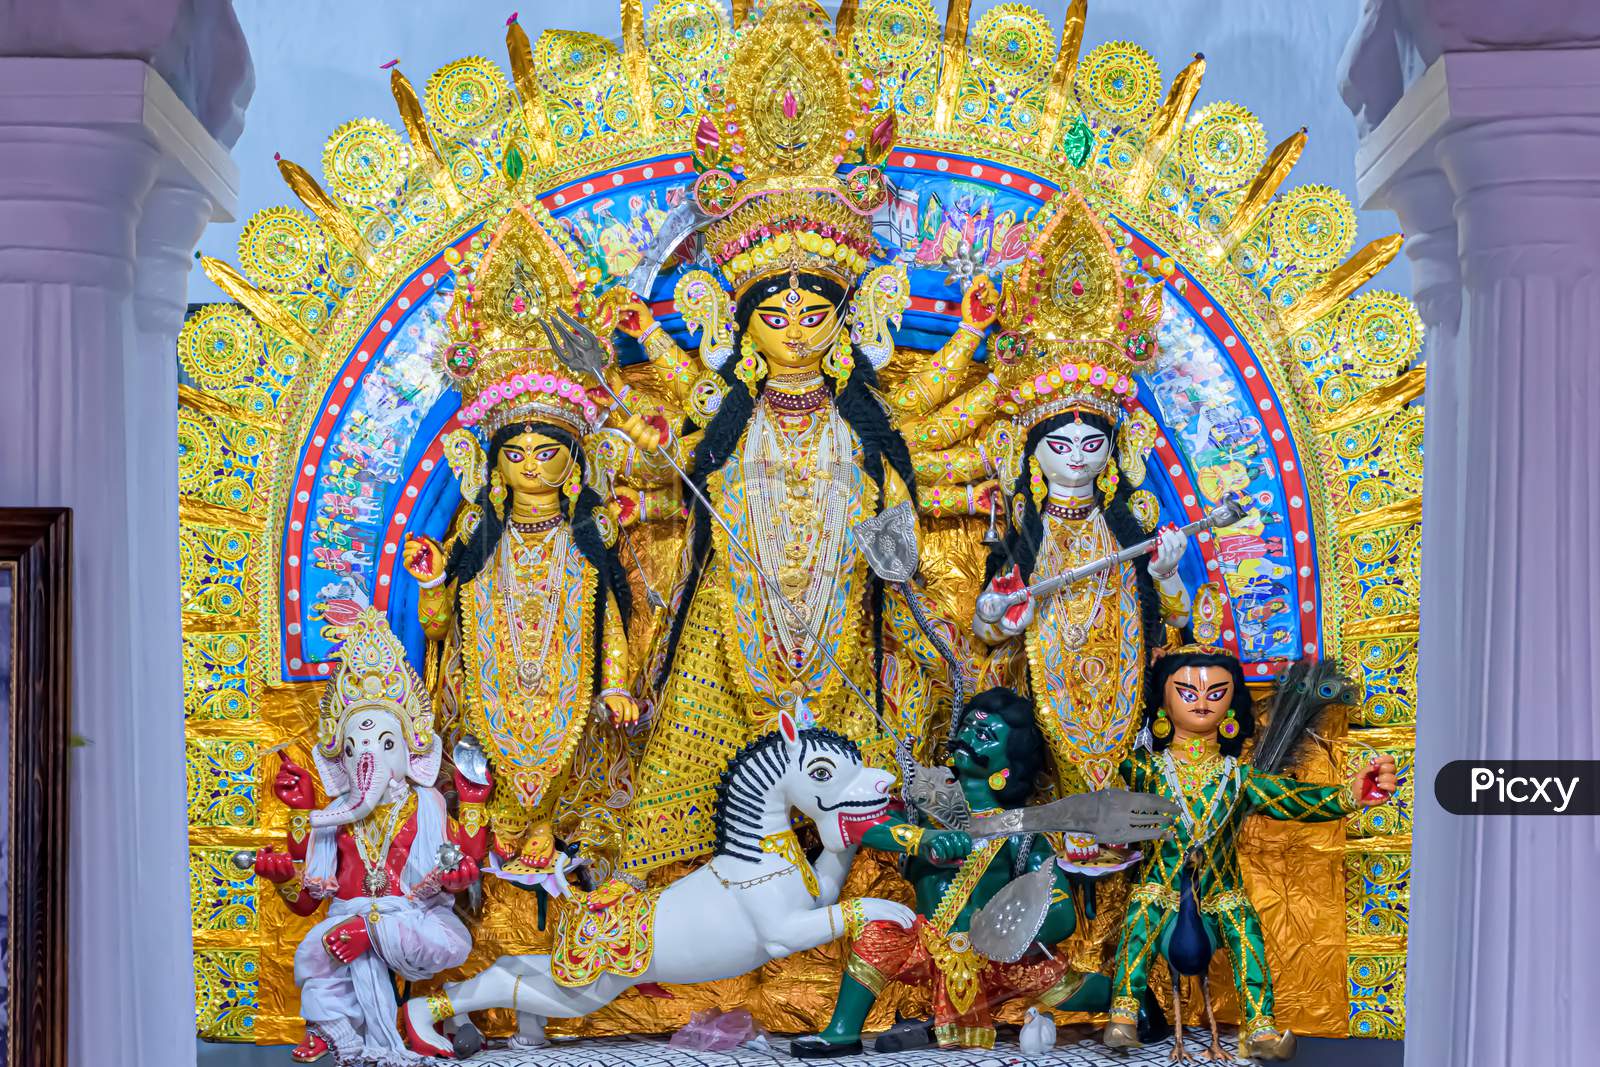 Goddess Durga Idol At Decorated Durga At Sovabazar Rajbari In Kolkata, West Bengal, India. Durga Puja Is Biggest Religious Festival Of Hinduism And Is Now Celebrated Worldwide.